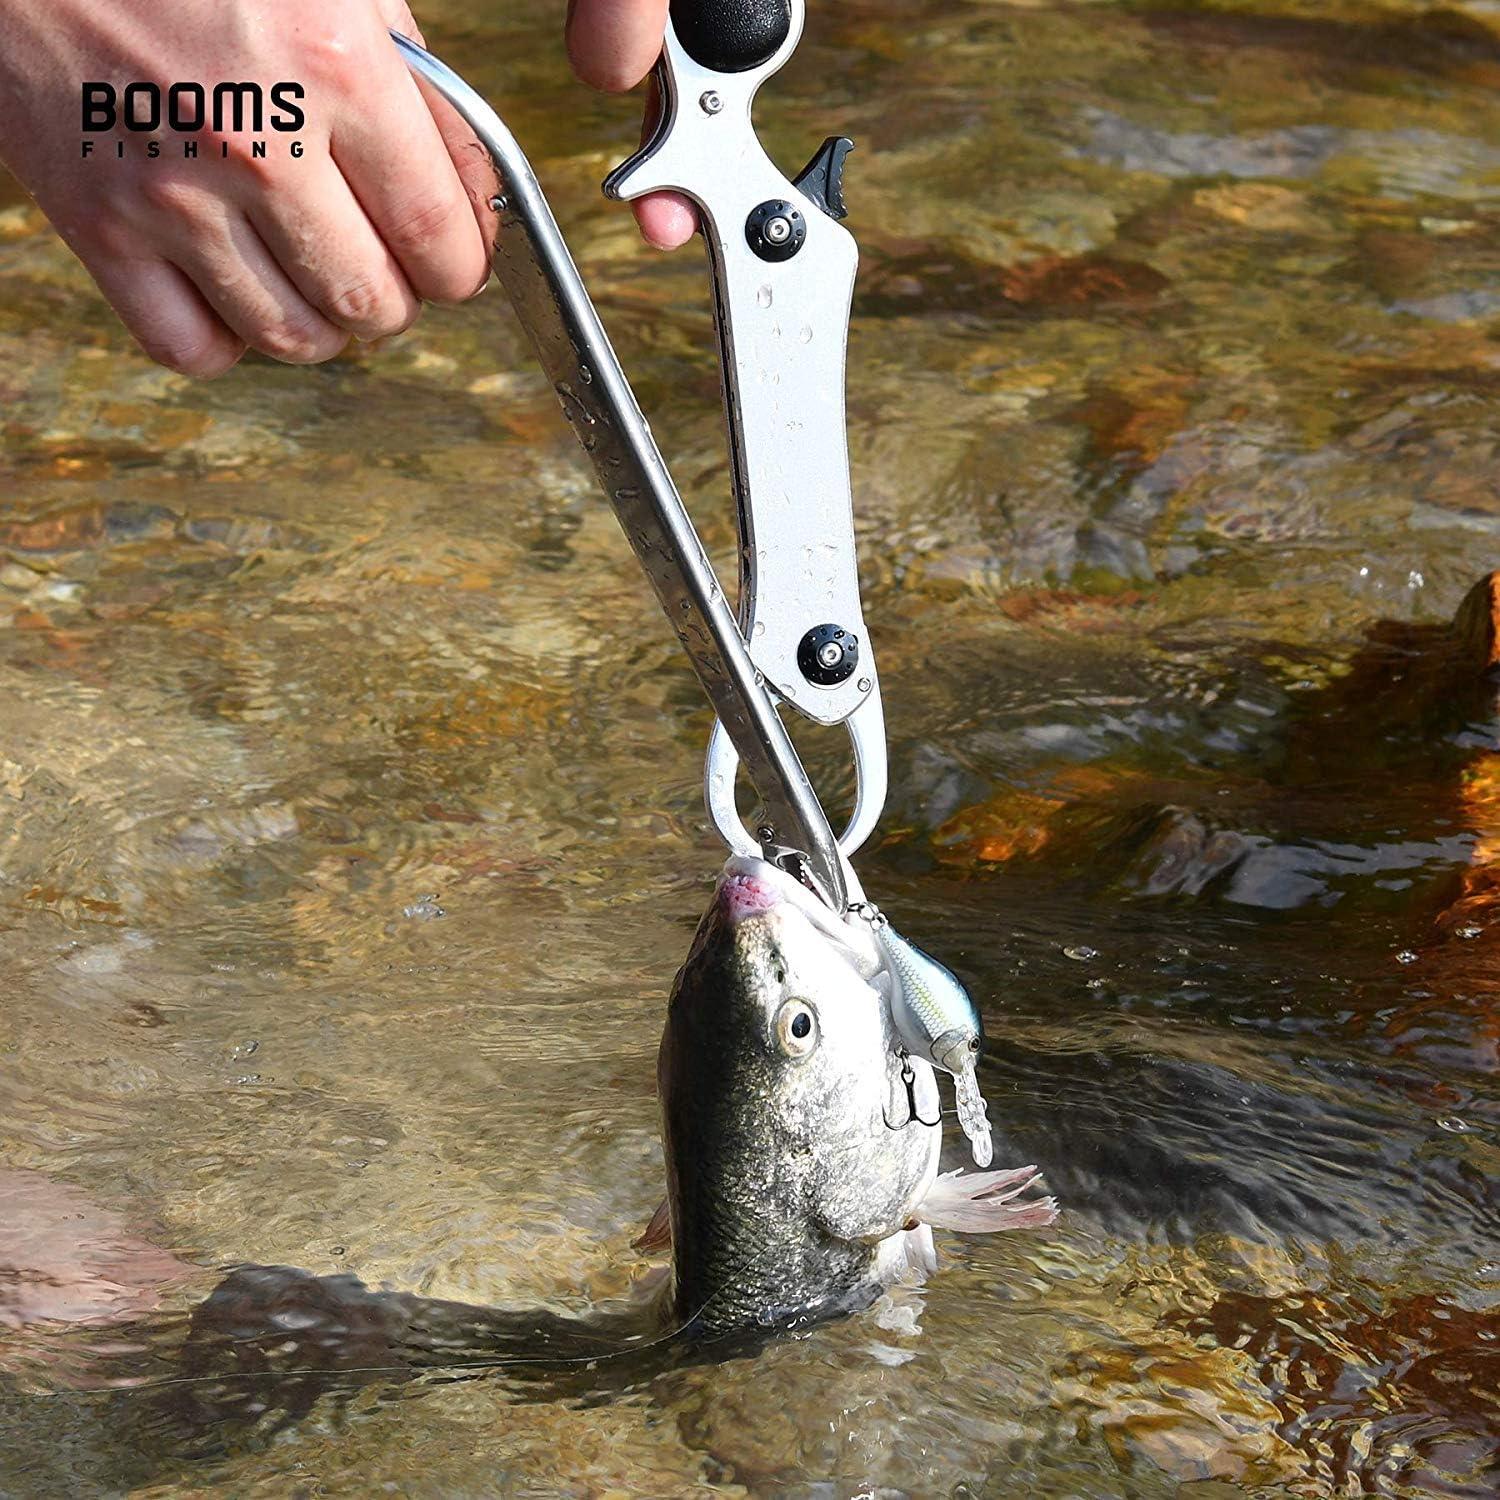 Booms Fishing R1 Stainless Steel Fish Hook Remover Extractor, 11-1